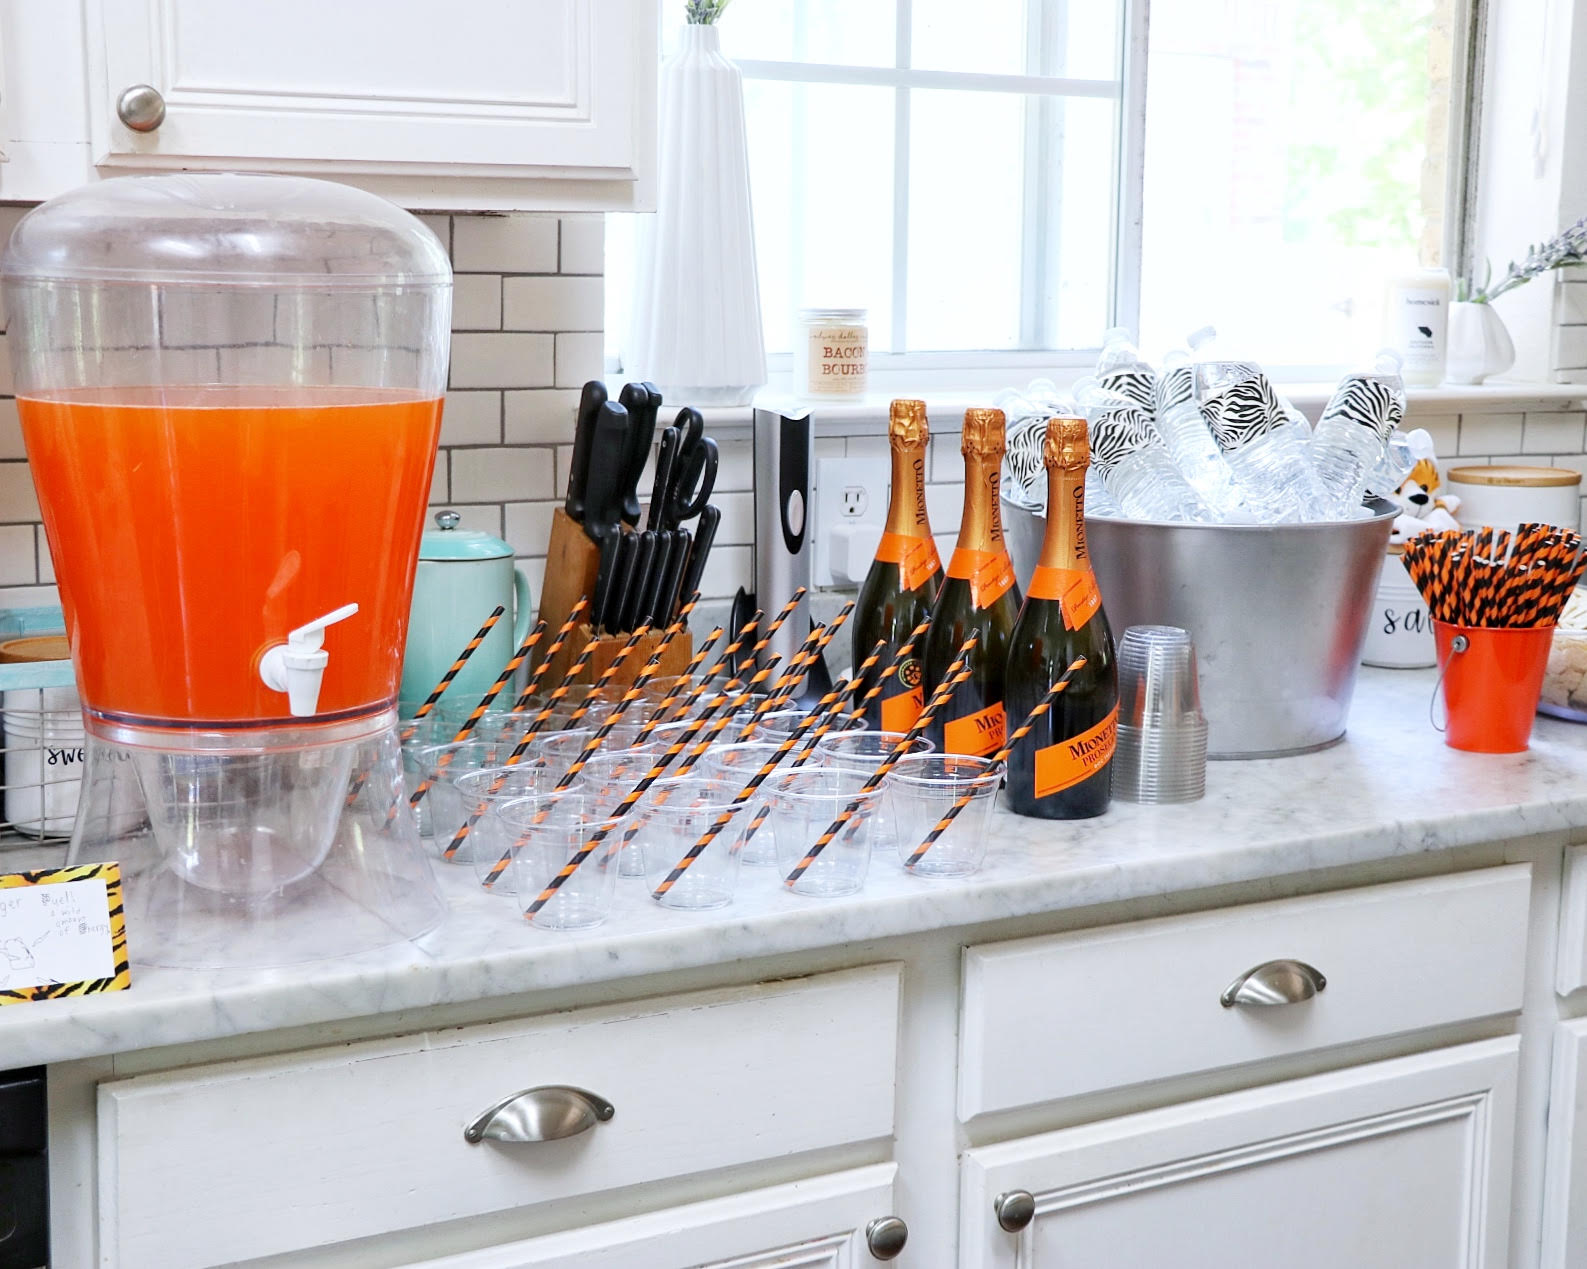 Beverage ideas for a tiger birthday party